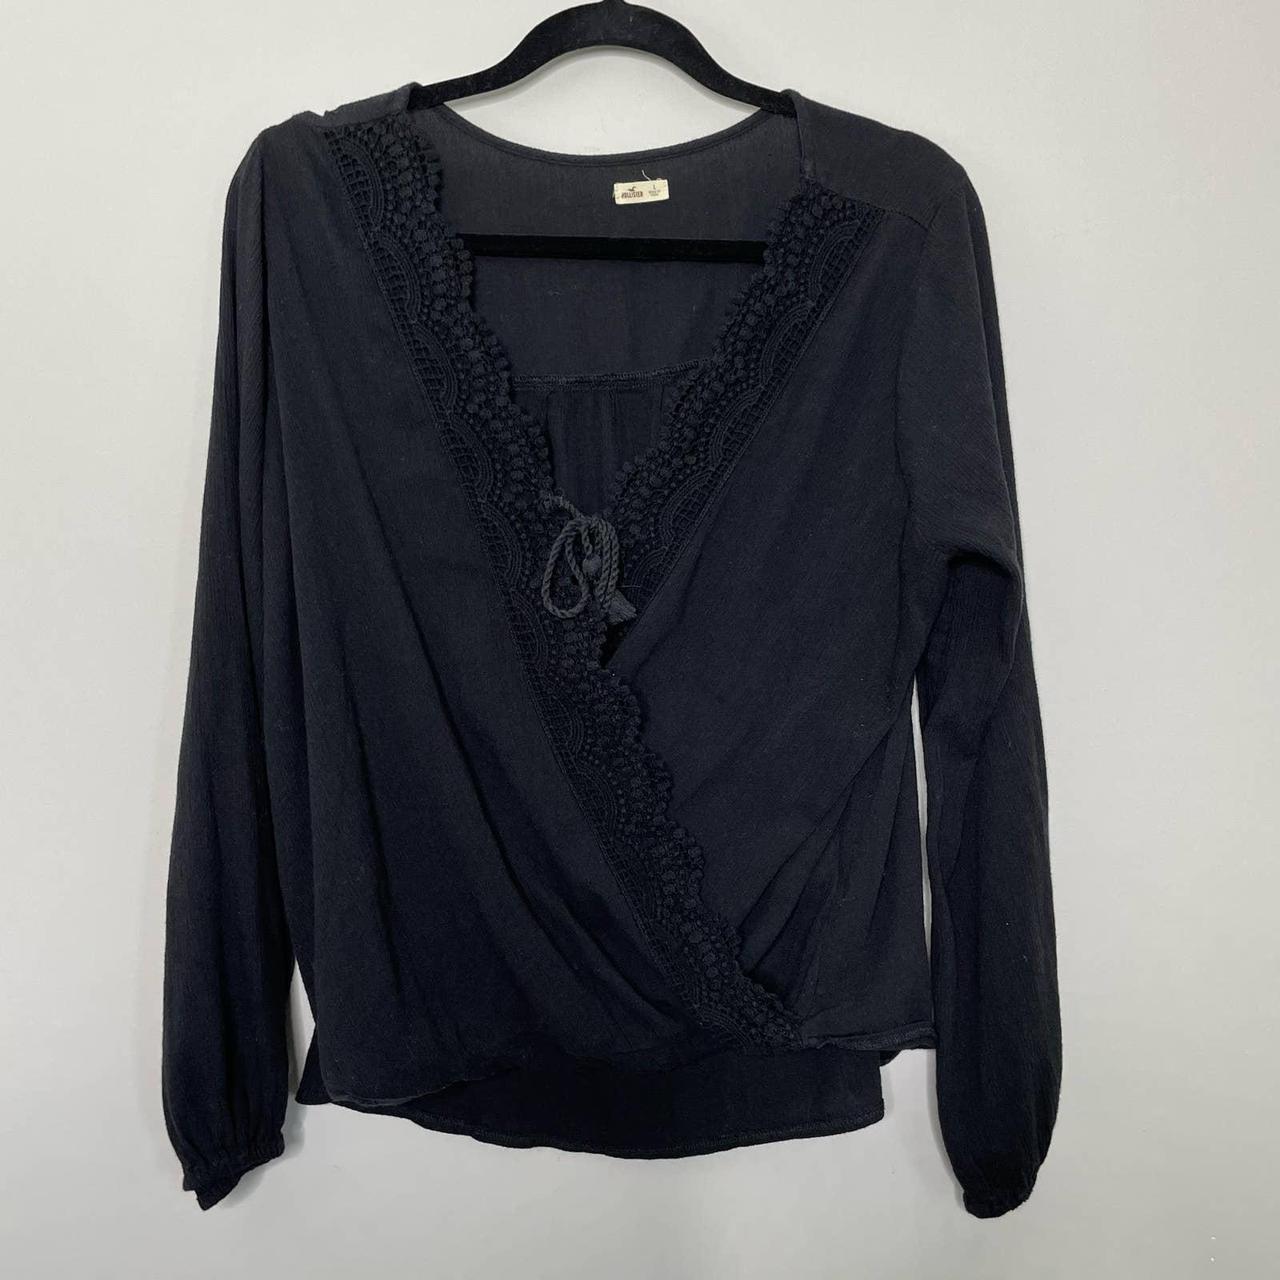 Hollister Co. LONG-SLEEVE LACE TRIM WRAP TOP - Long sleeved top